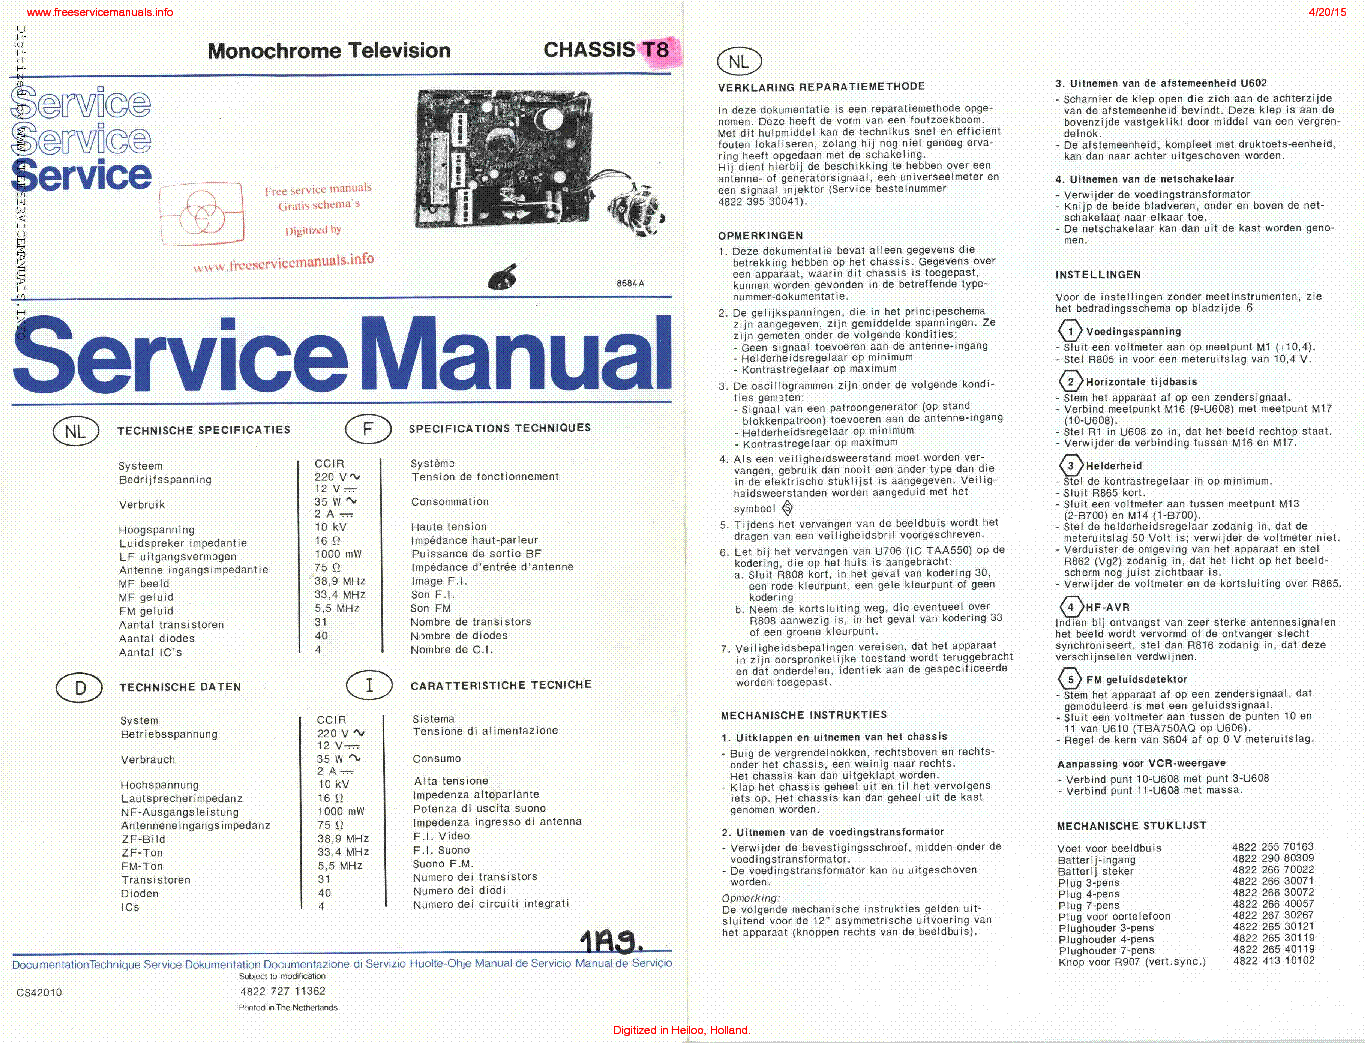 PHILIPS MONOCHROME TELEVISION CHASSIS T8 service manual (1st page)